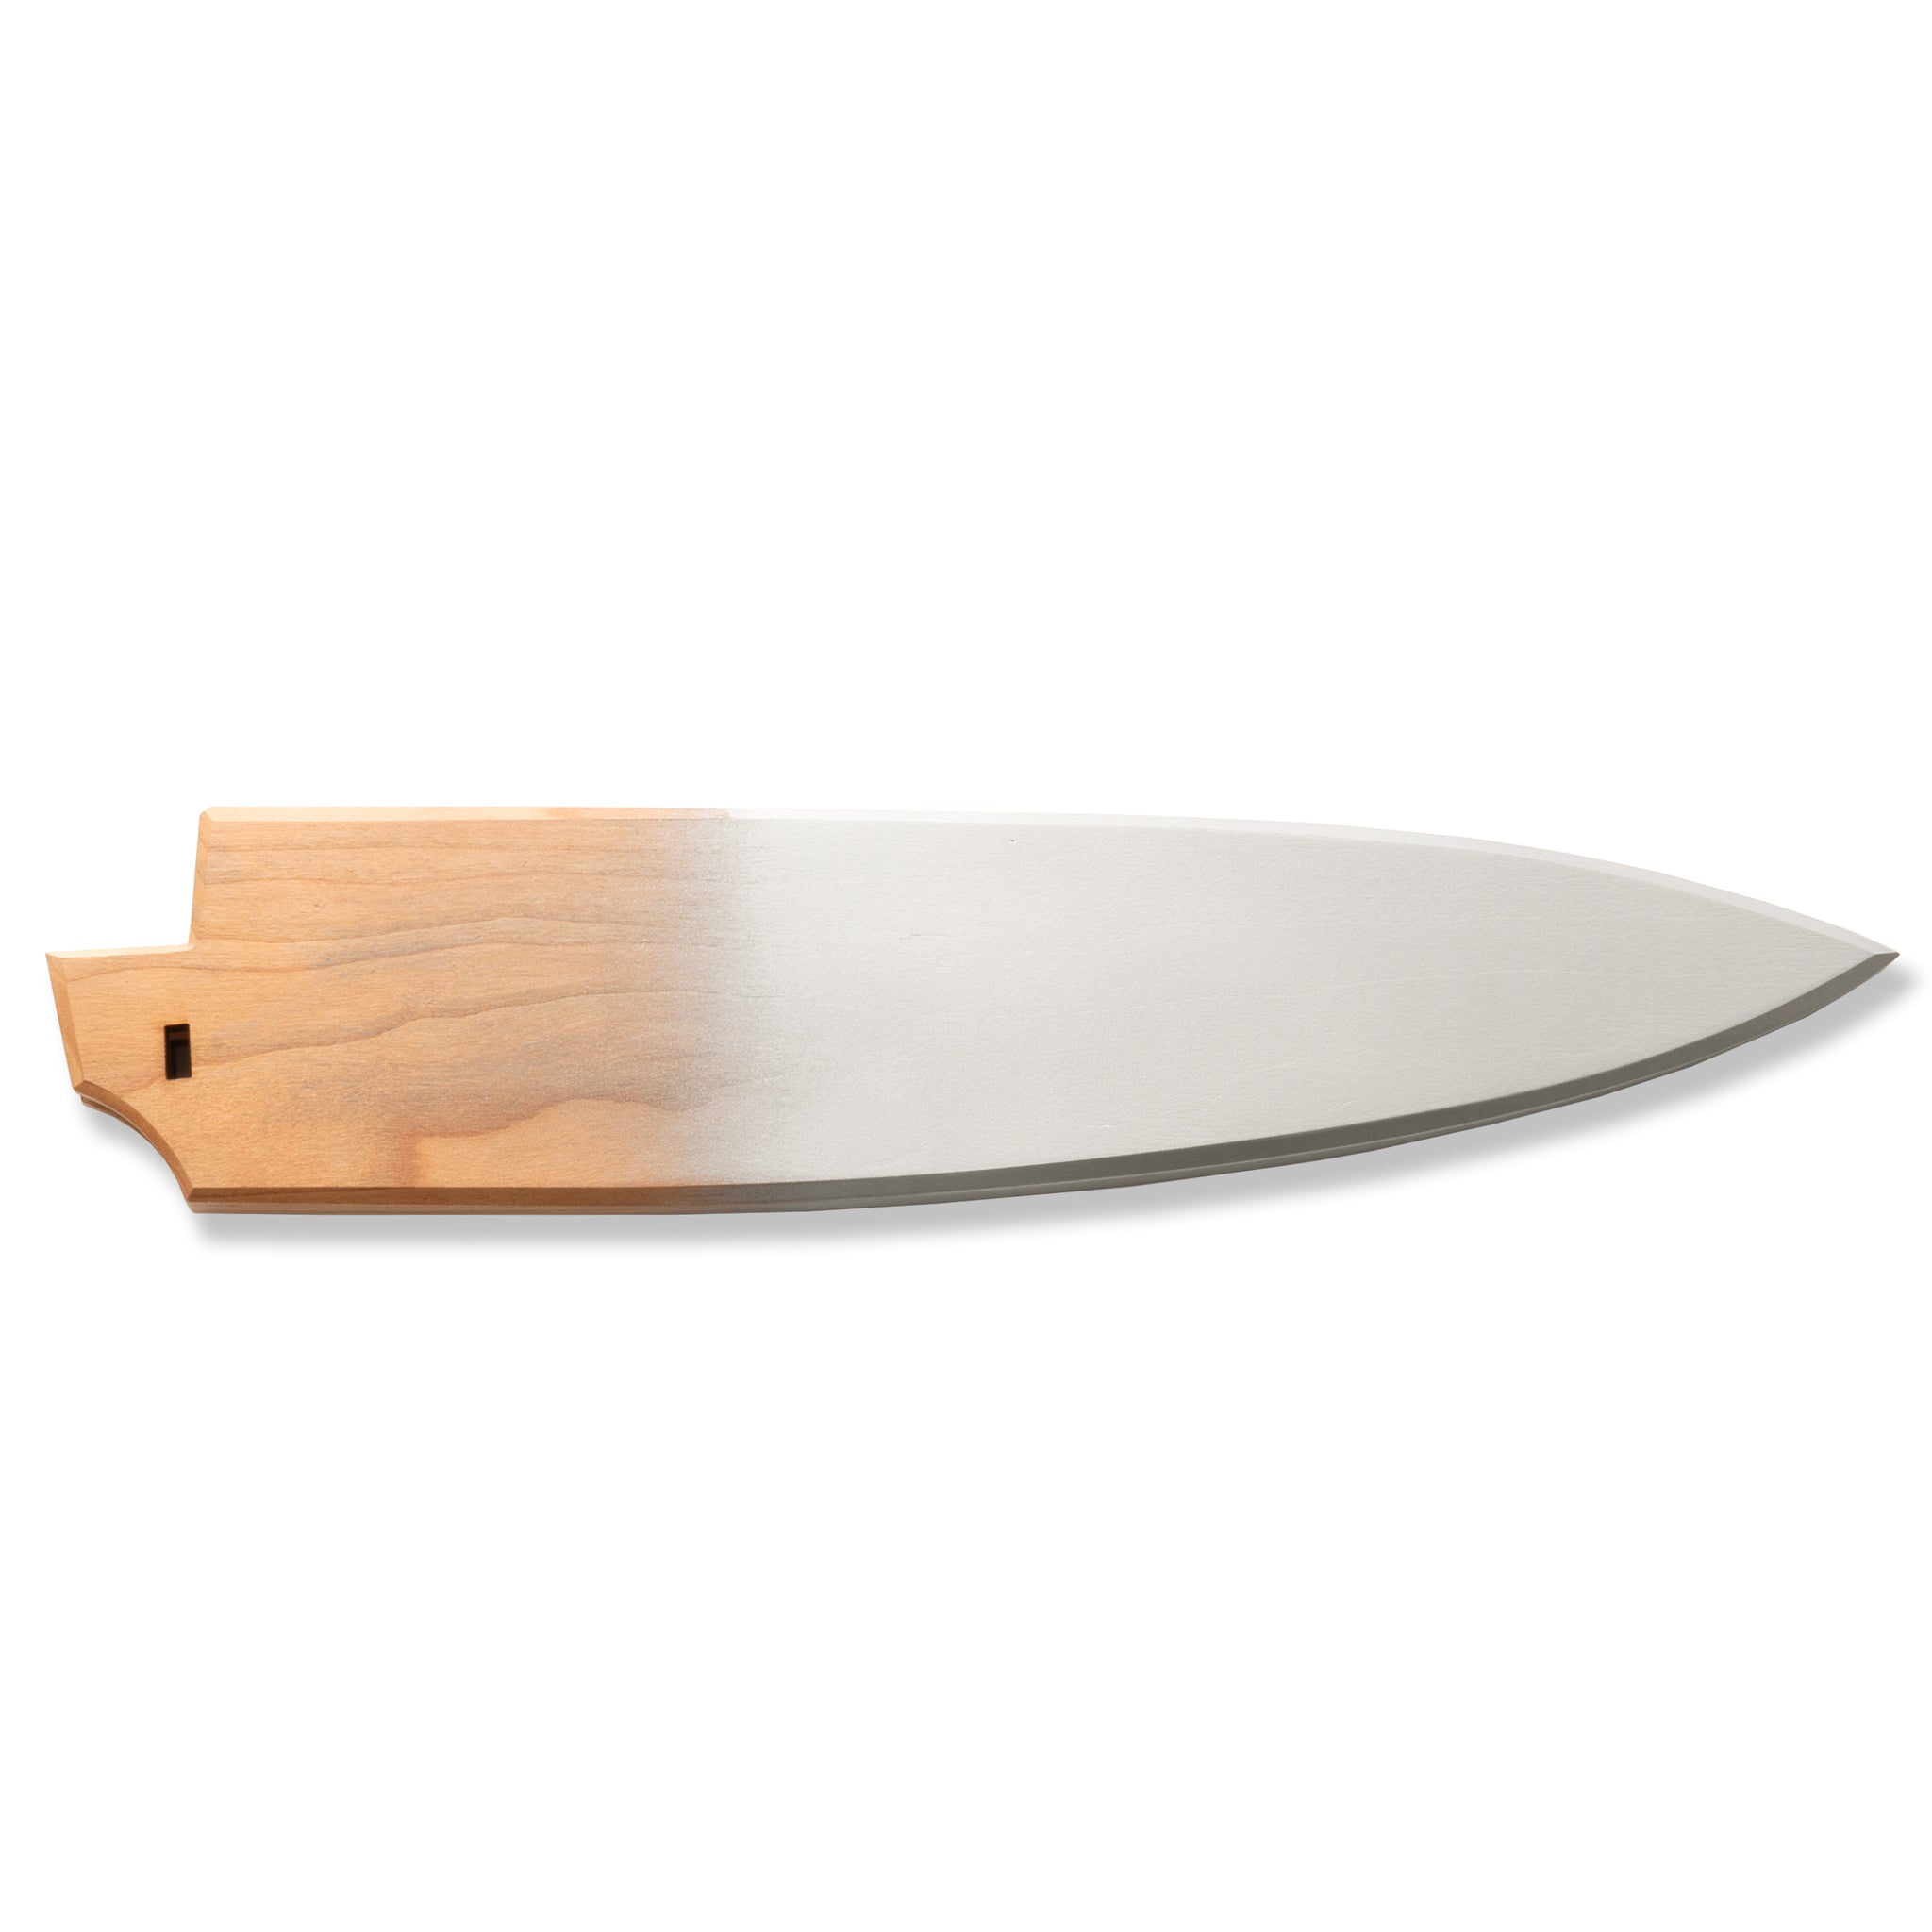 Silver and cherrywood saya knife cover for Town Cutler Ag 47 10" Chef Knife. 